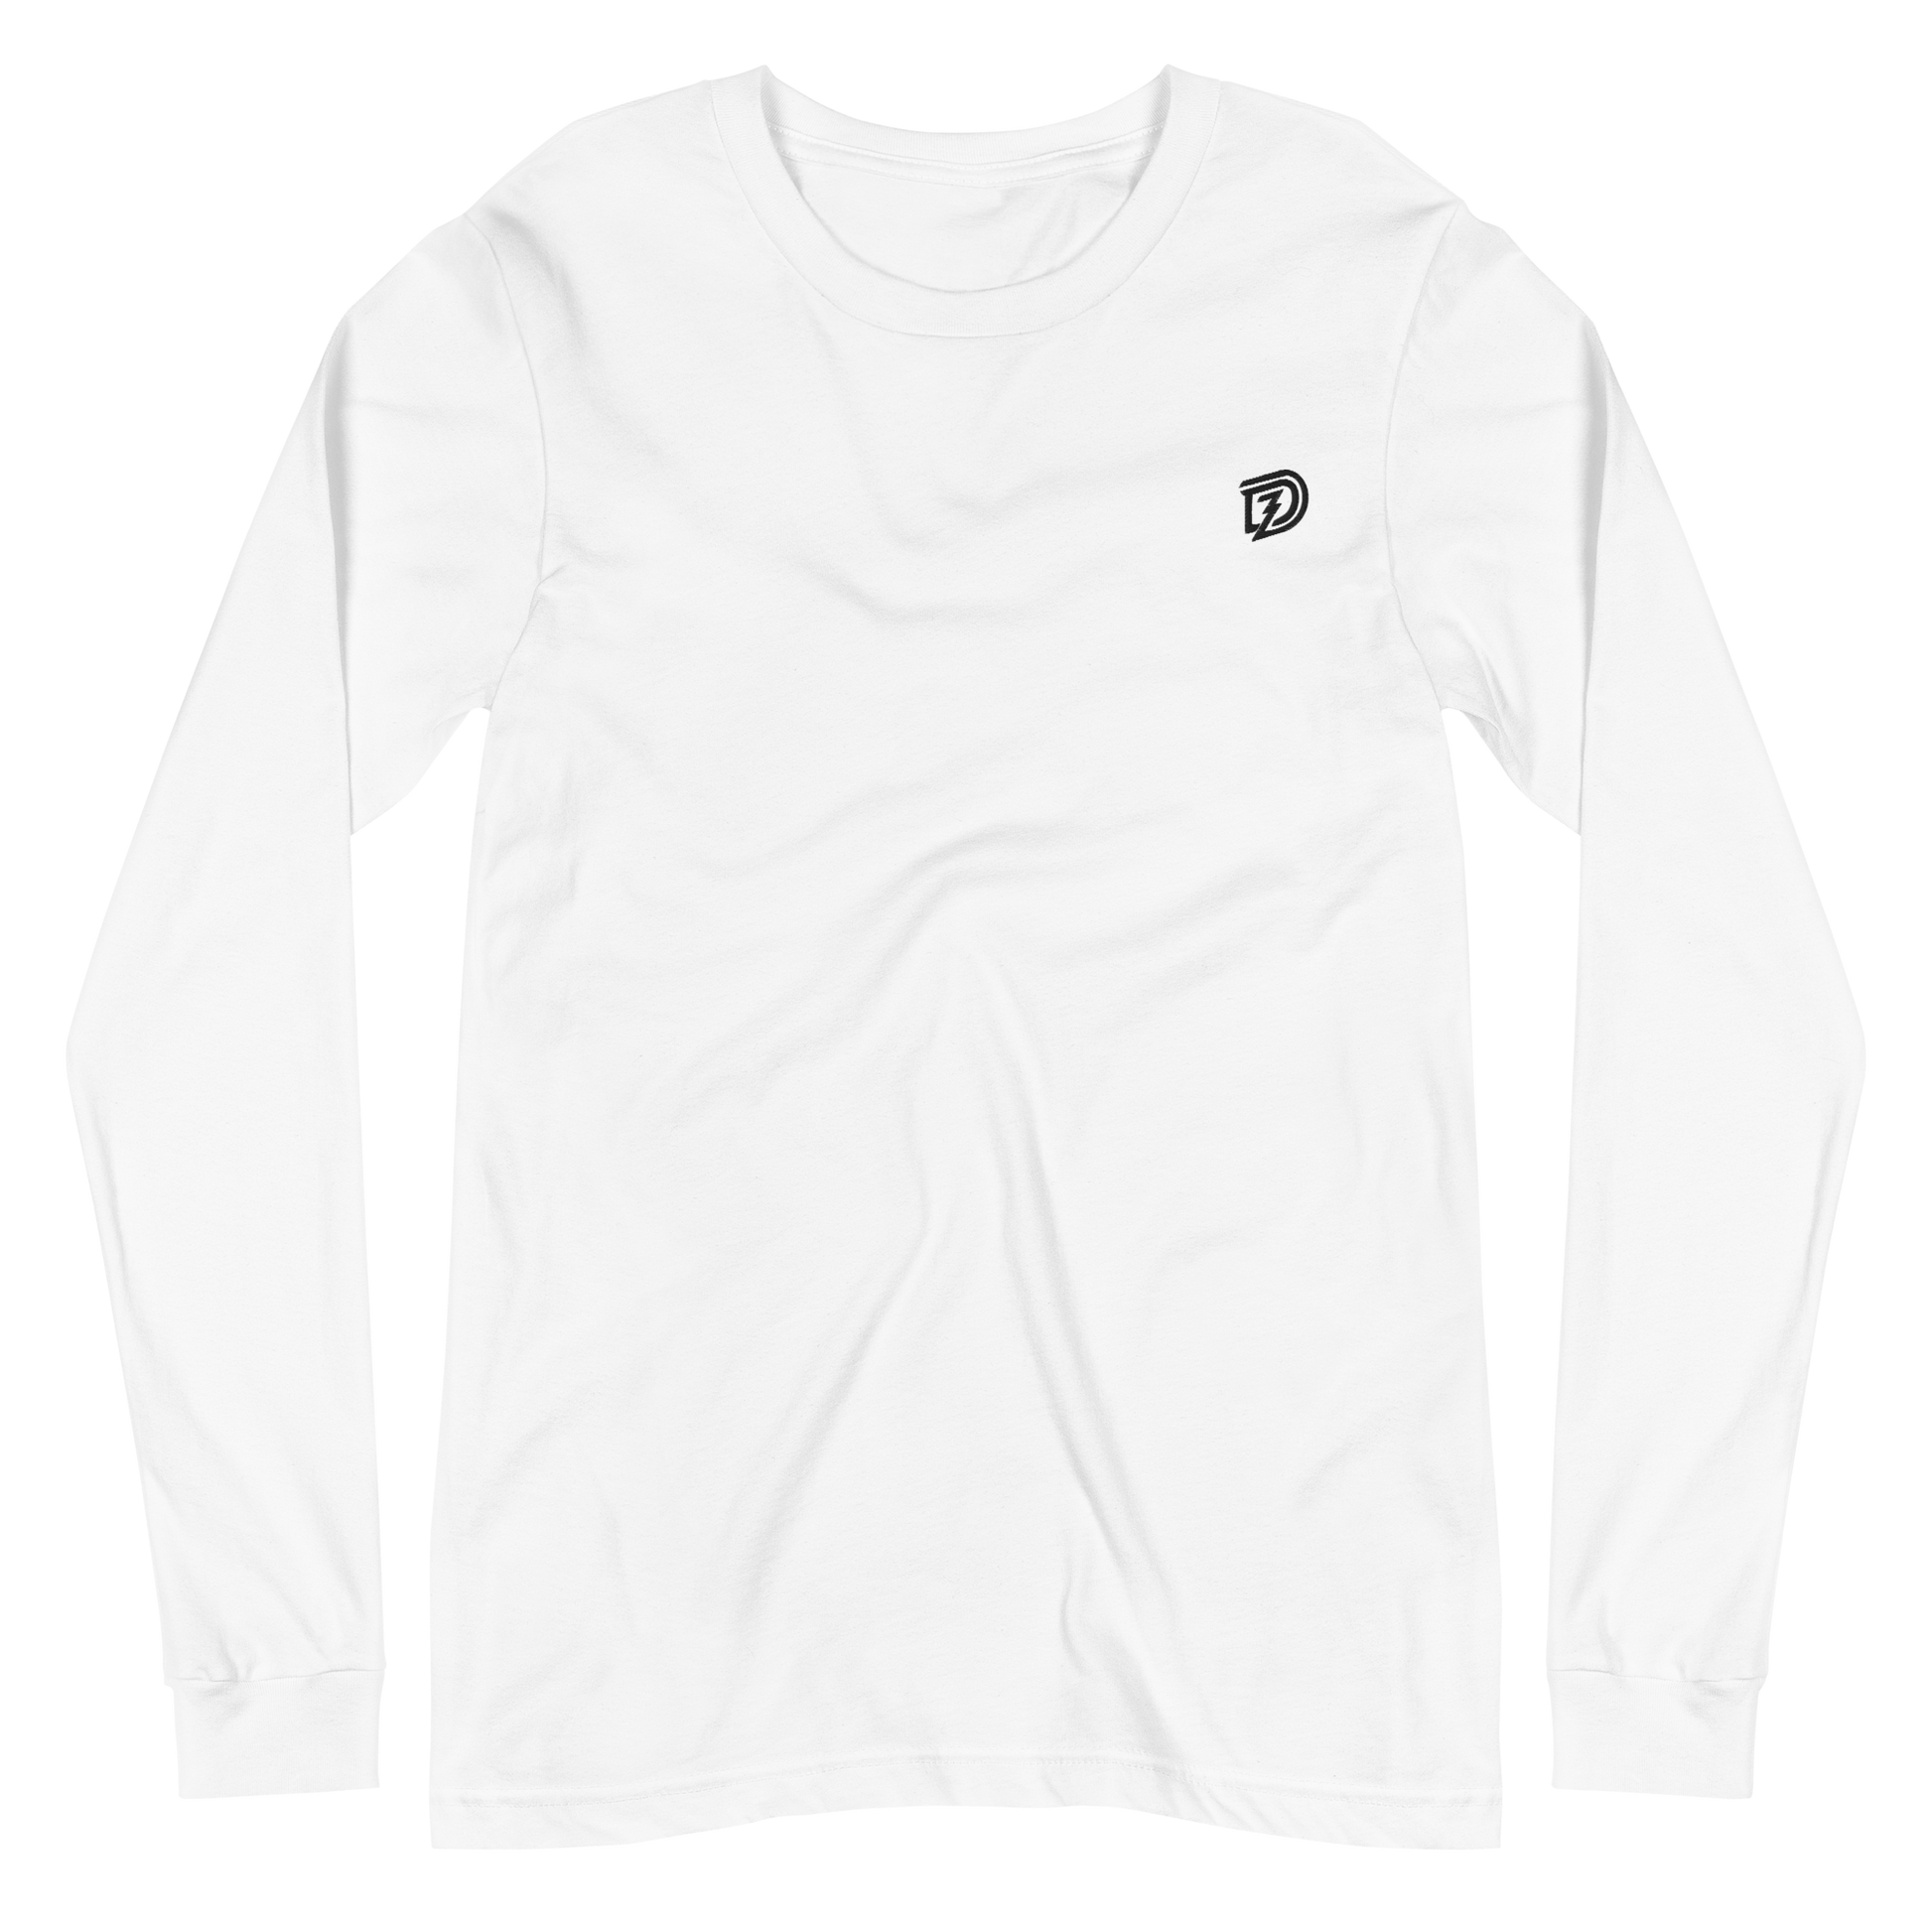 DZ Monochrome Embroidered Unisex Long Sleeve Tee in White